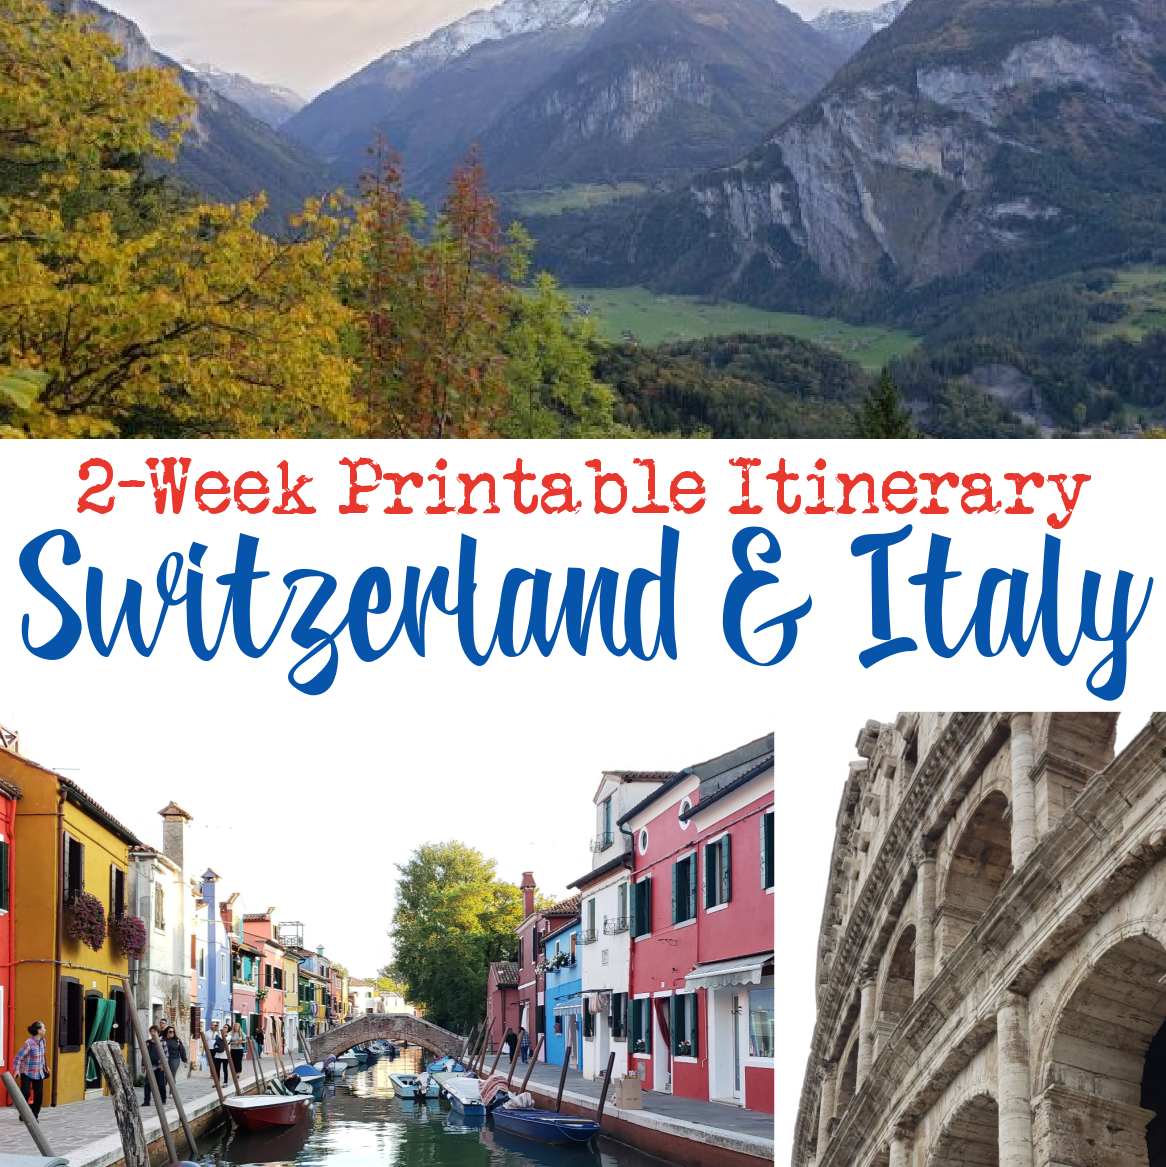 tours to italy and switzerland